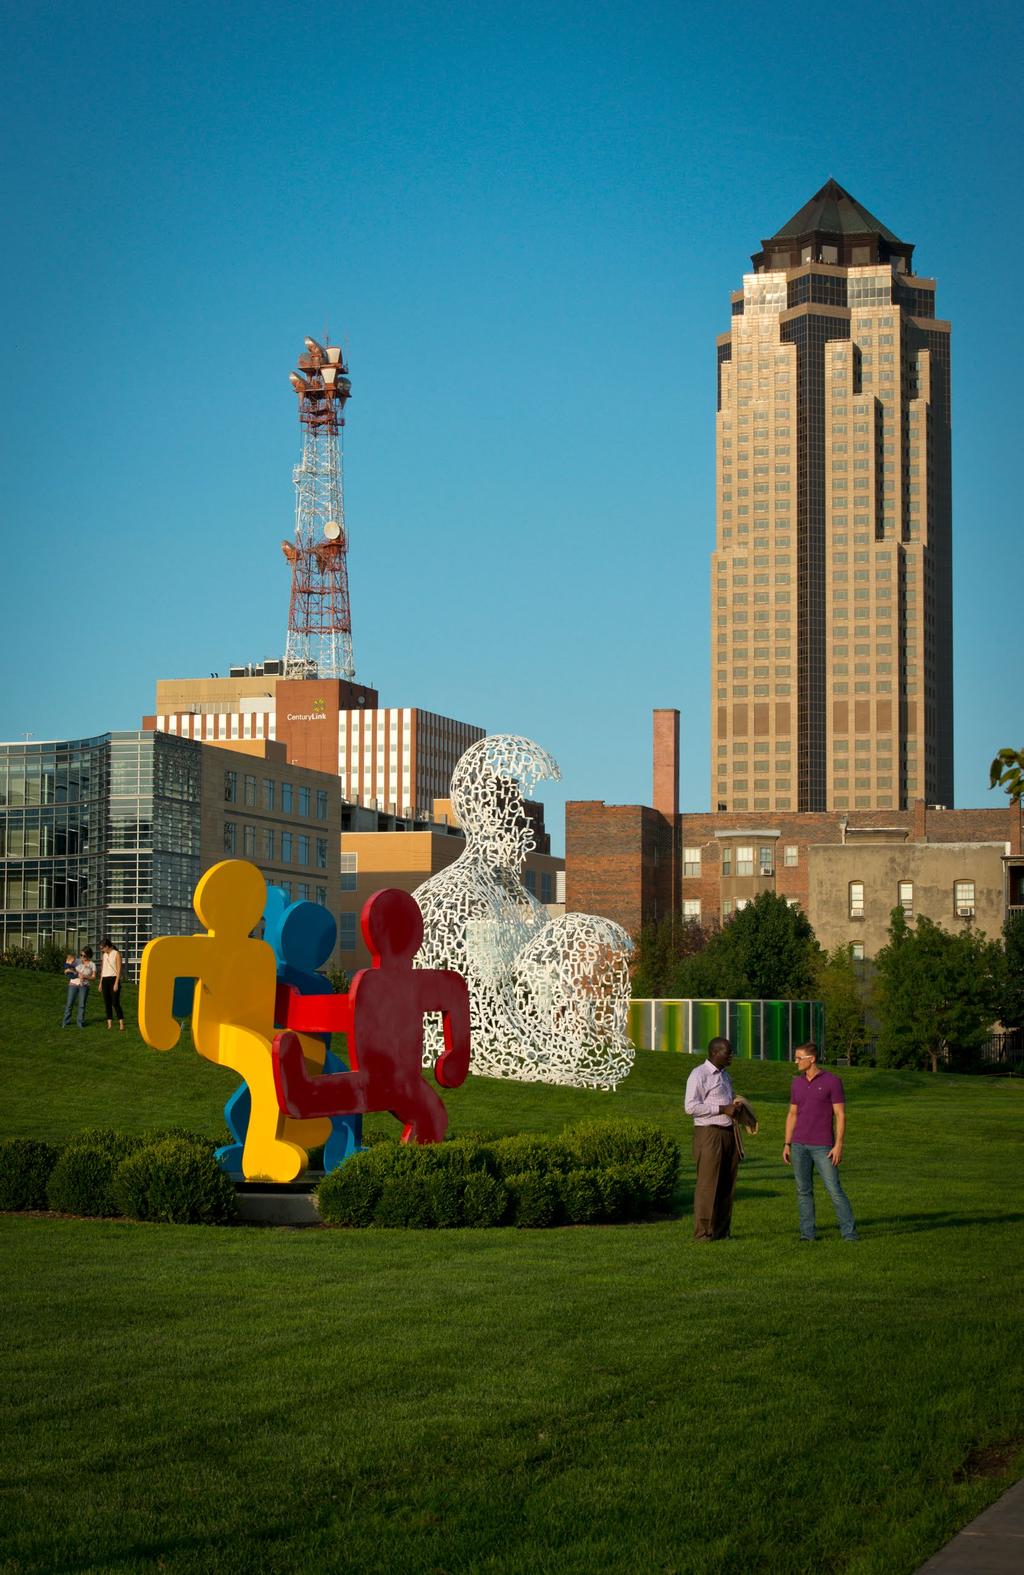 DISCOVER DIFFERENT IN DES MOINES Des Moines, Iowa (#DSMUSA) is home to 650,000 people, Fortune 500 companies, thriving local businesses, an impressive arts and culture scene and a long list of